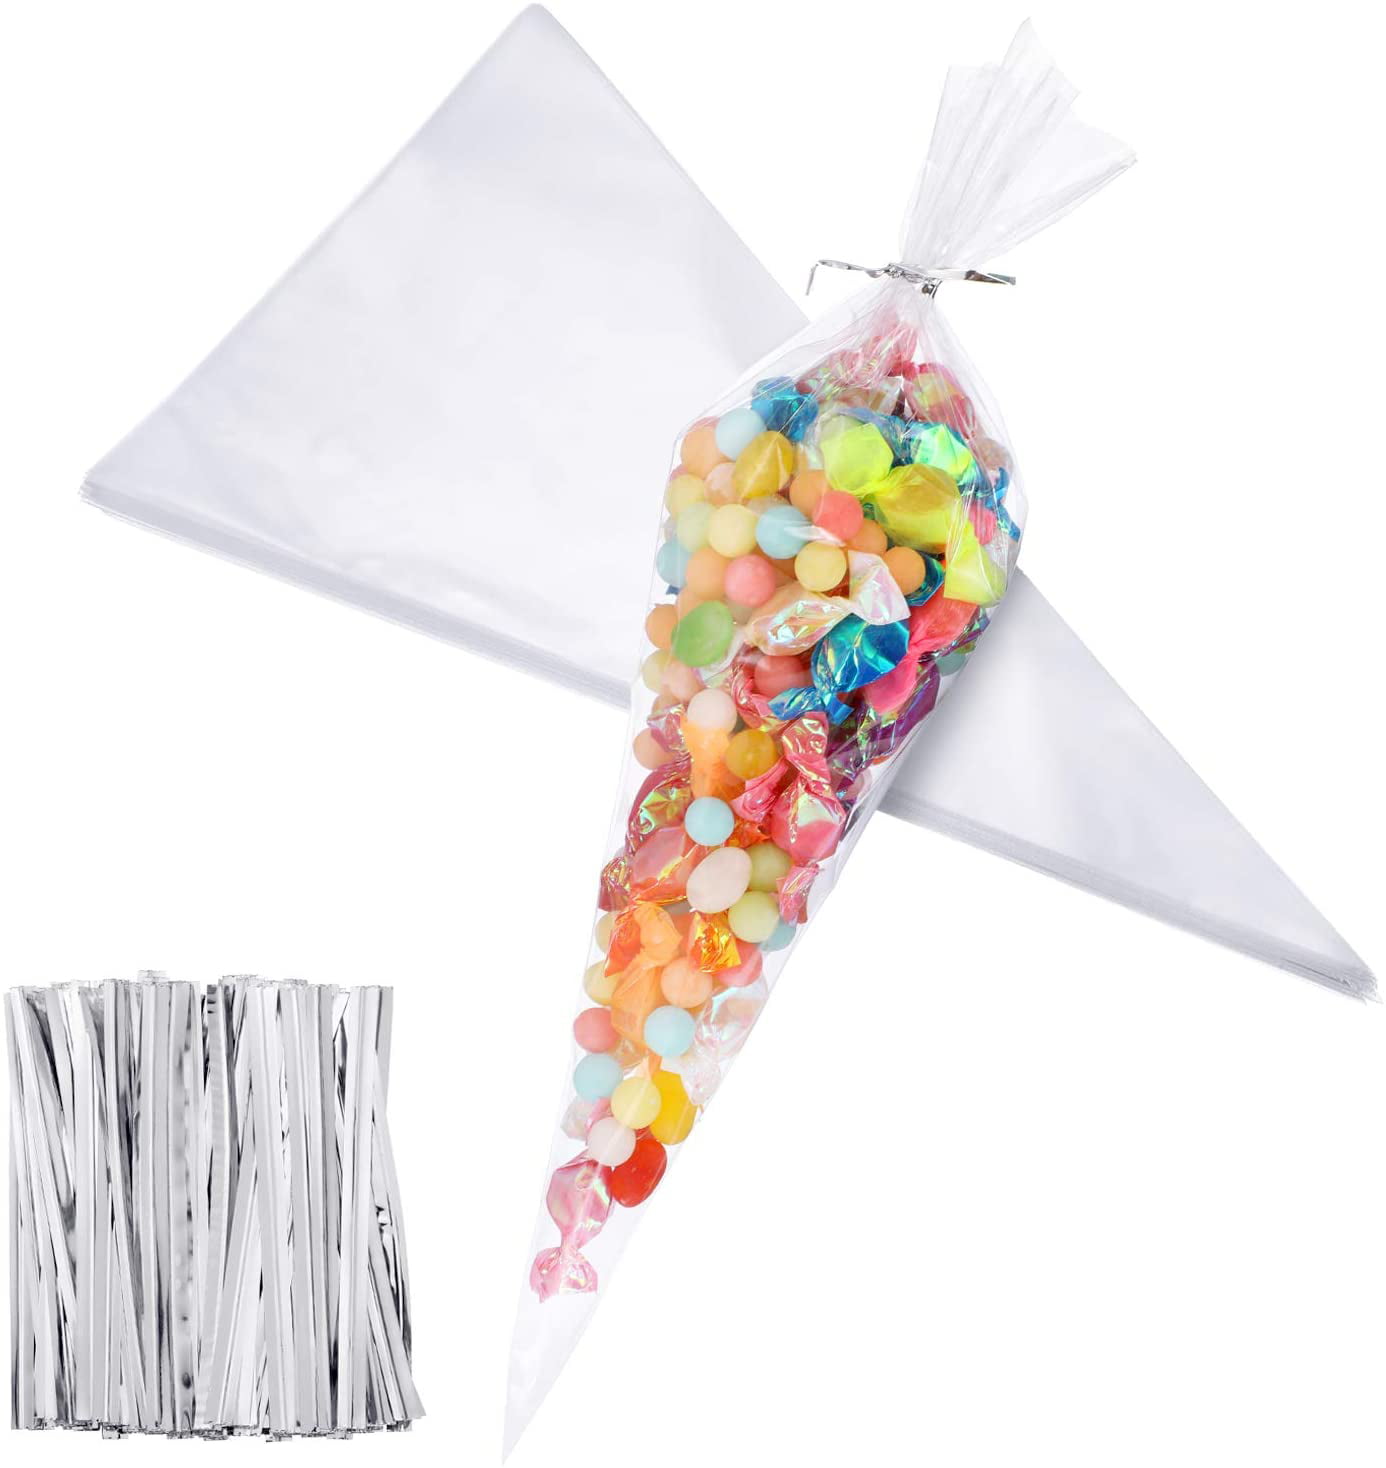 Clear Cellophane Cone Bags Twist Ties Large size Gift Party Candy Bags